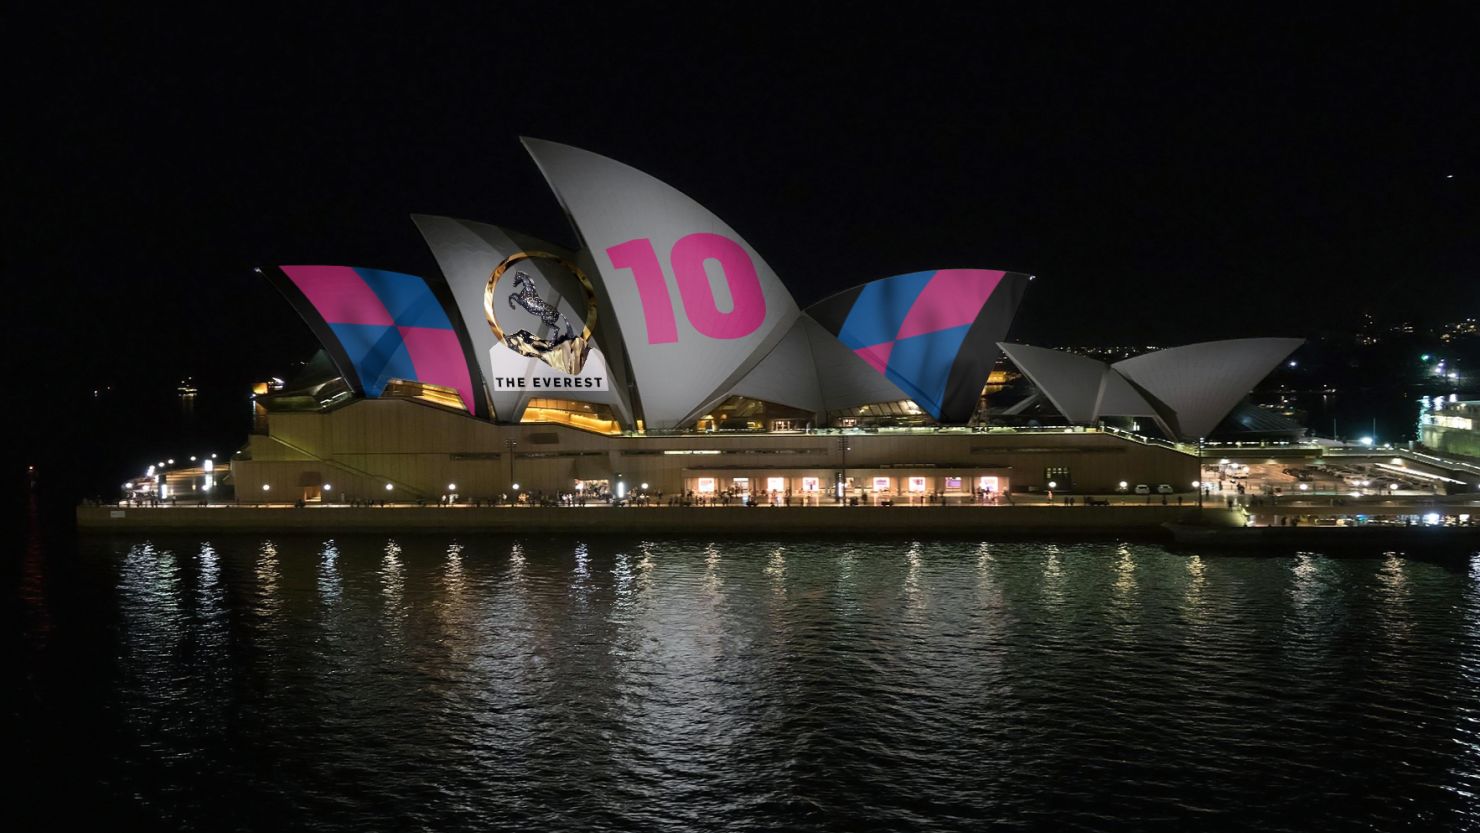 Protests broke out over a plan to light up the Sydney Opera House to advertize the upcoming Everest Cup horse race.